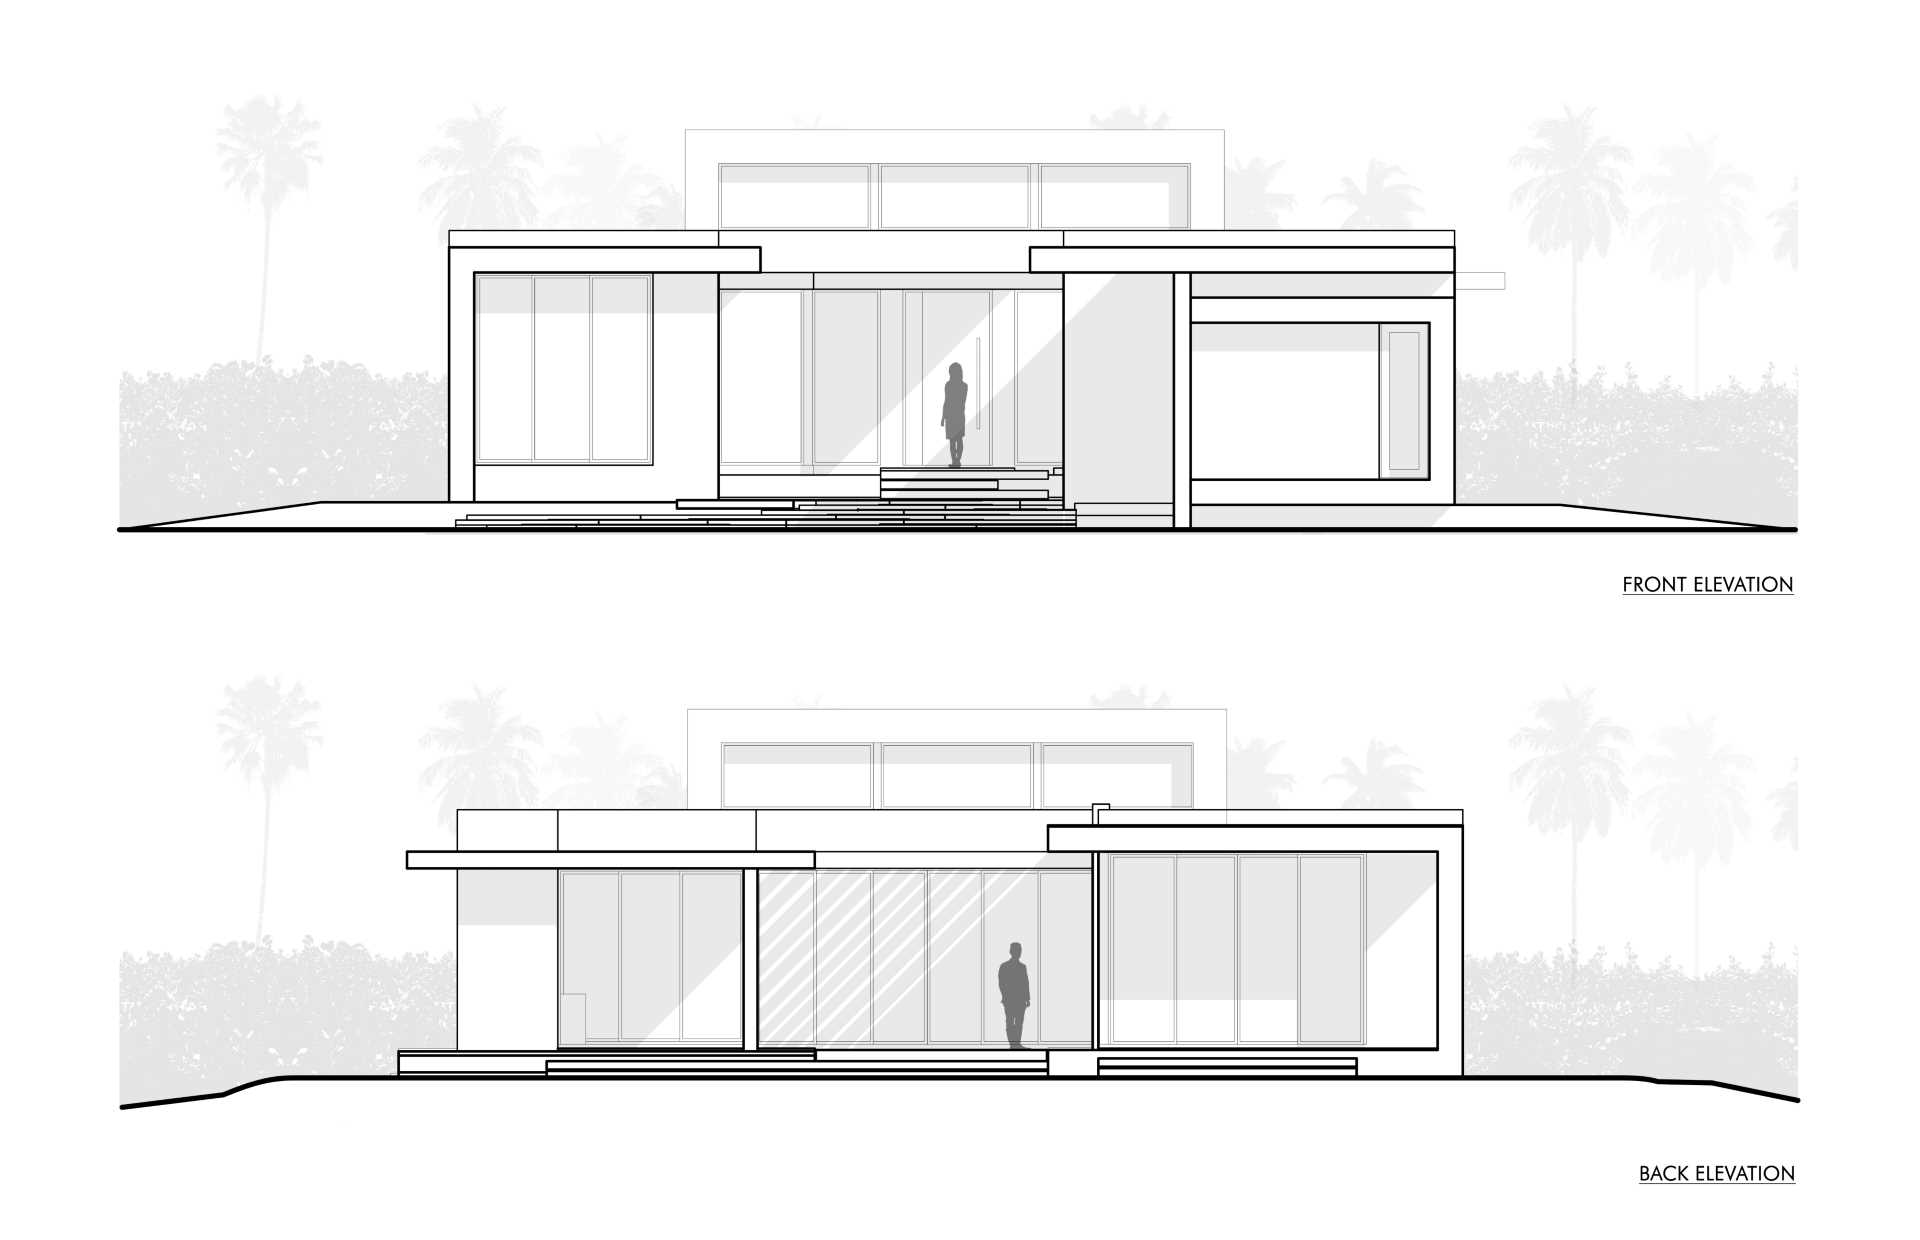 The elevation plan of a modern home.